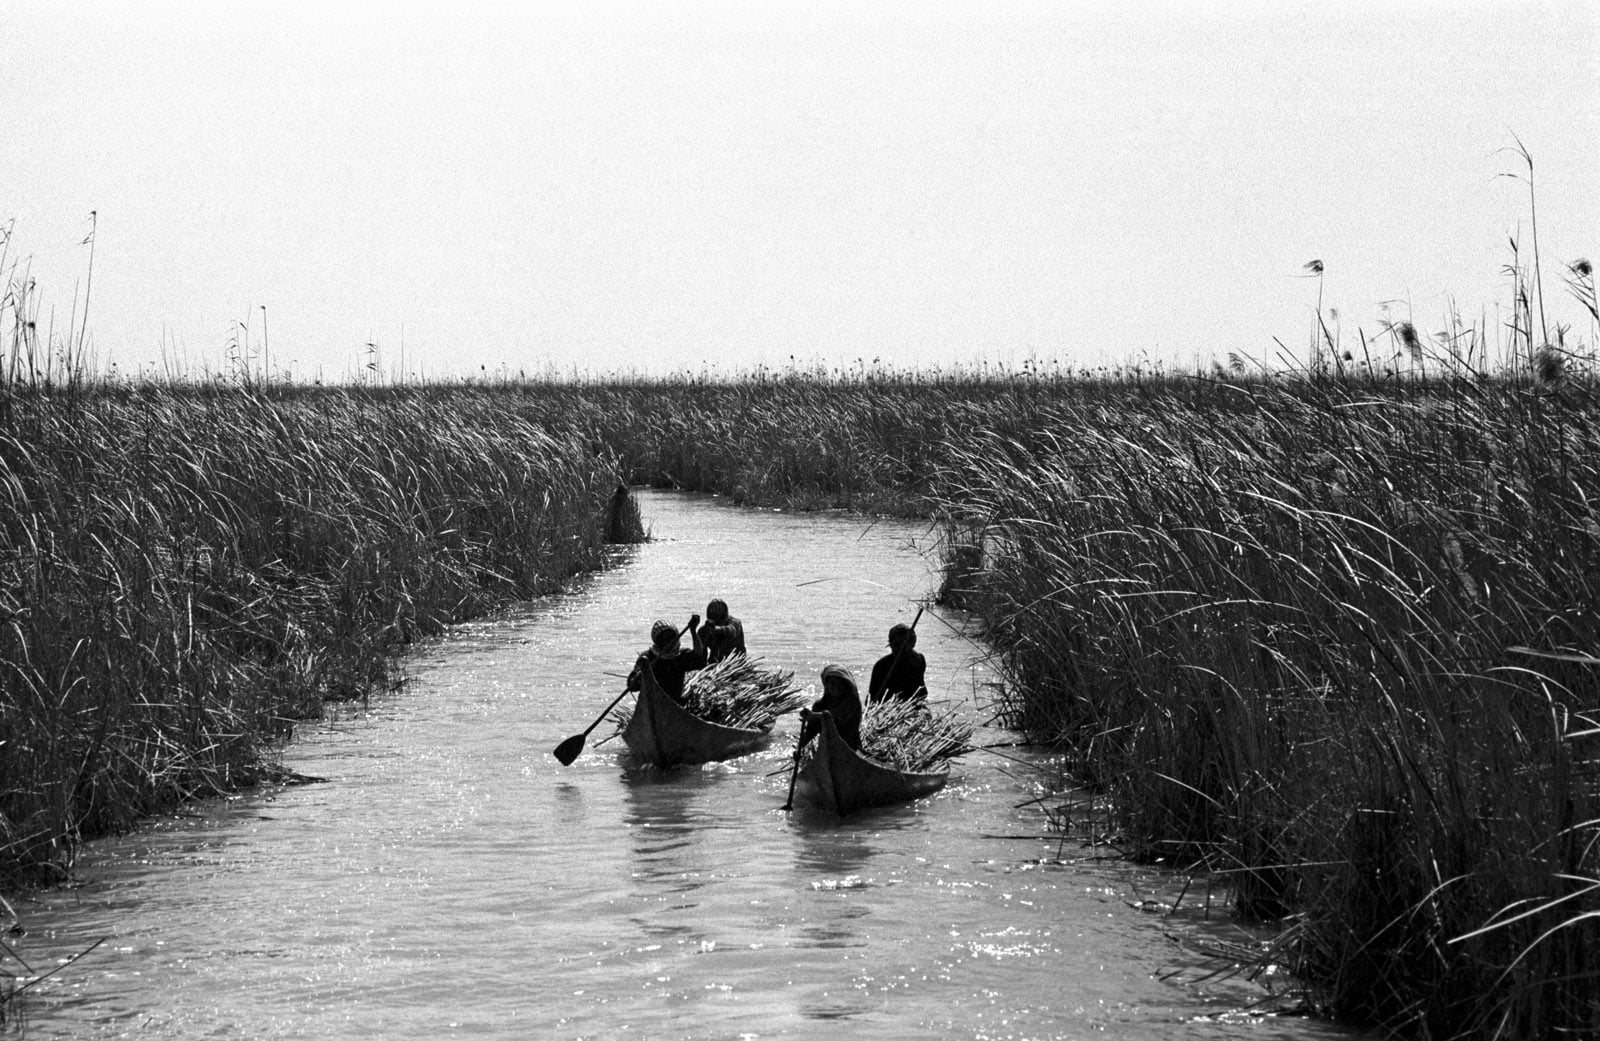 Canoes laden with reeds, men paddle home.